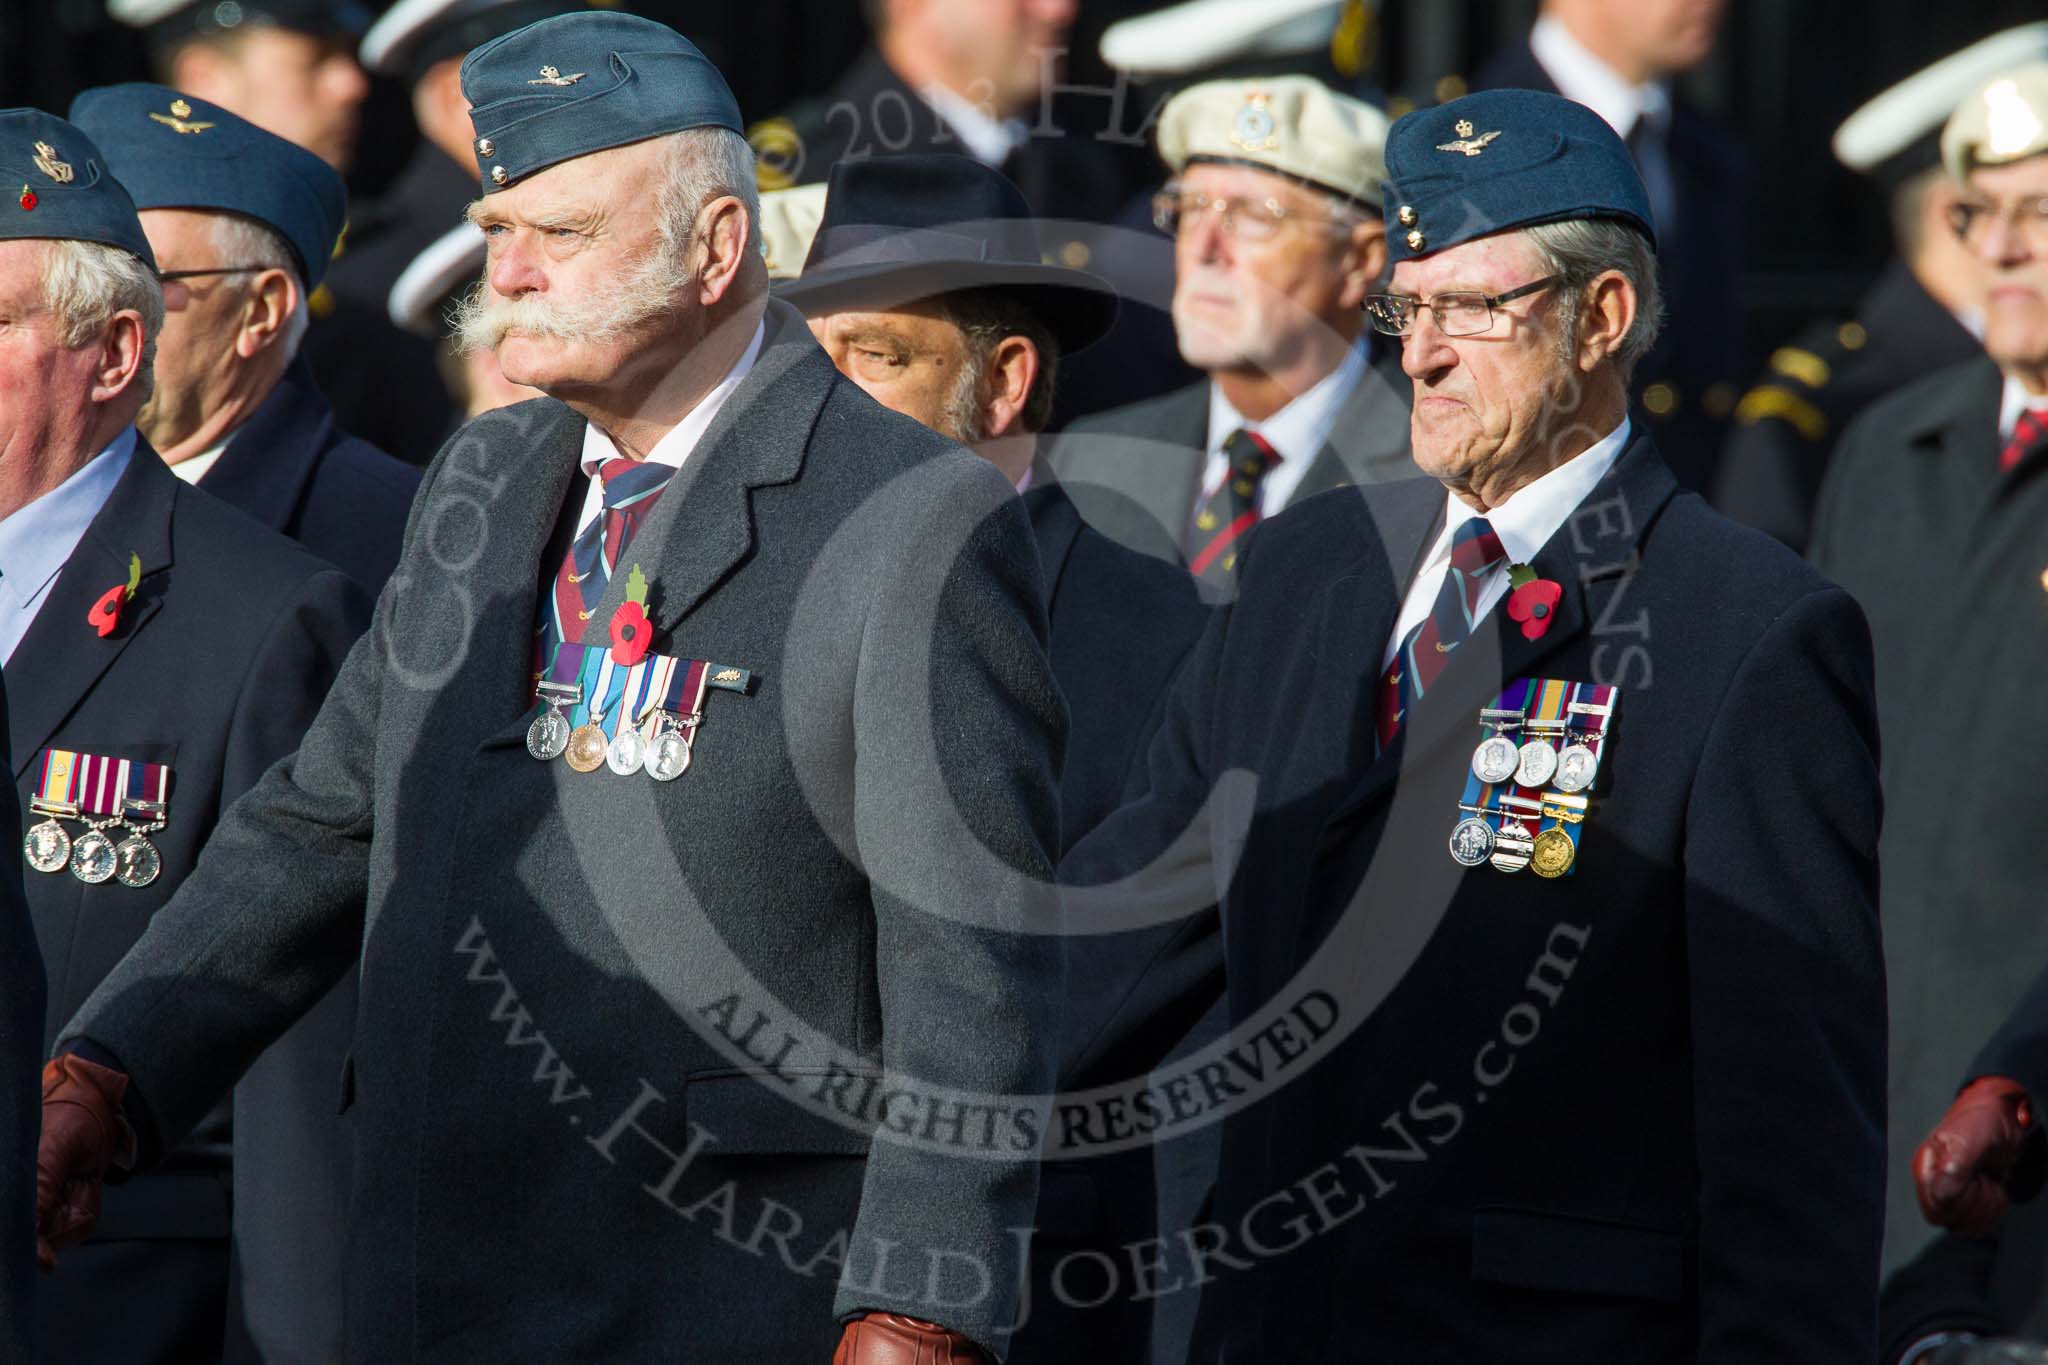 Remembrance Sunday at the Cenotaph in London 2014: Group C21 - Royal Air Force Air Loadmasters Association.
Press stand opposite the Foreign Office building, Whitehall, London SW1,
London,
Greater London,
United Kingdom,
on 09 November 2014 at 11:40, image #181